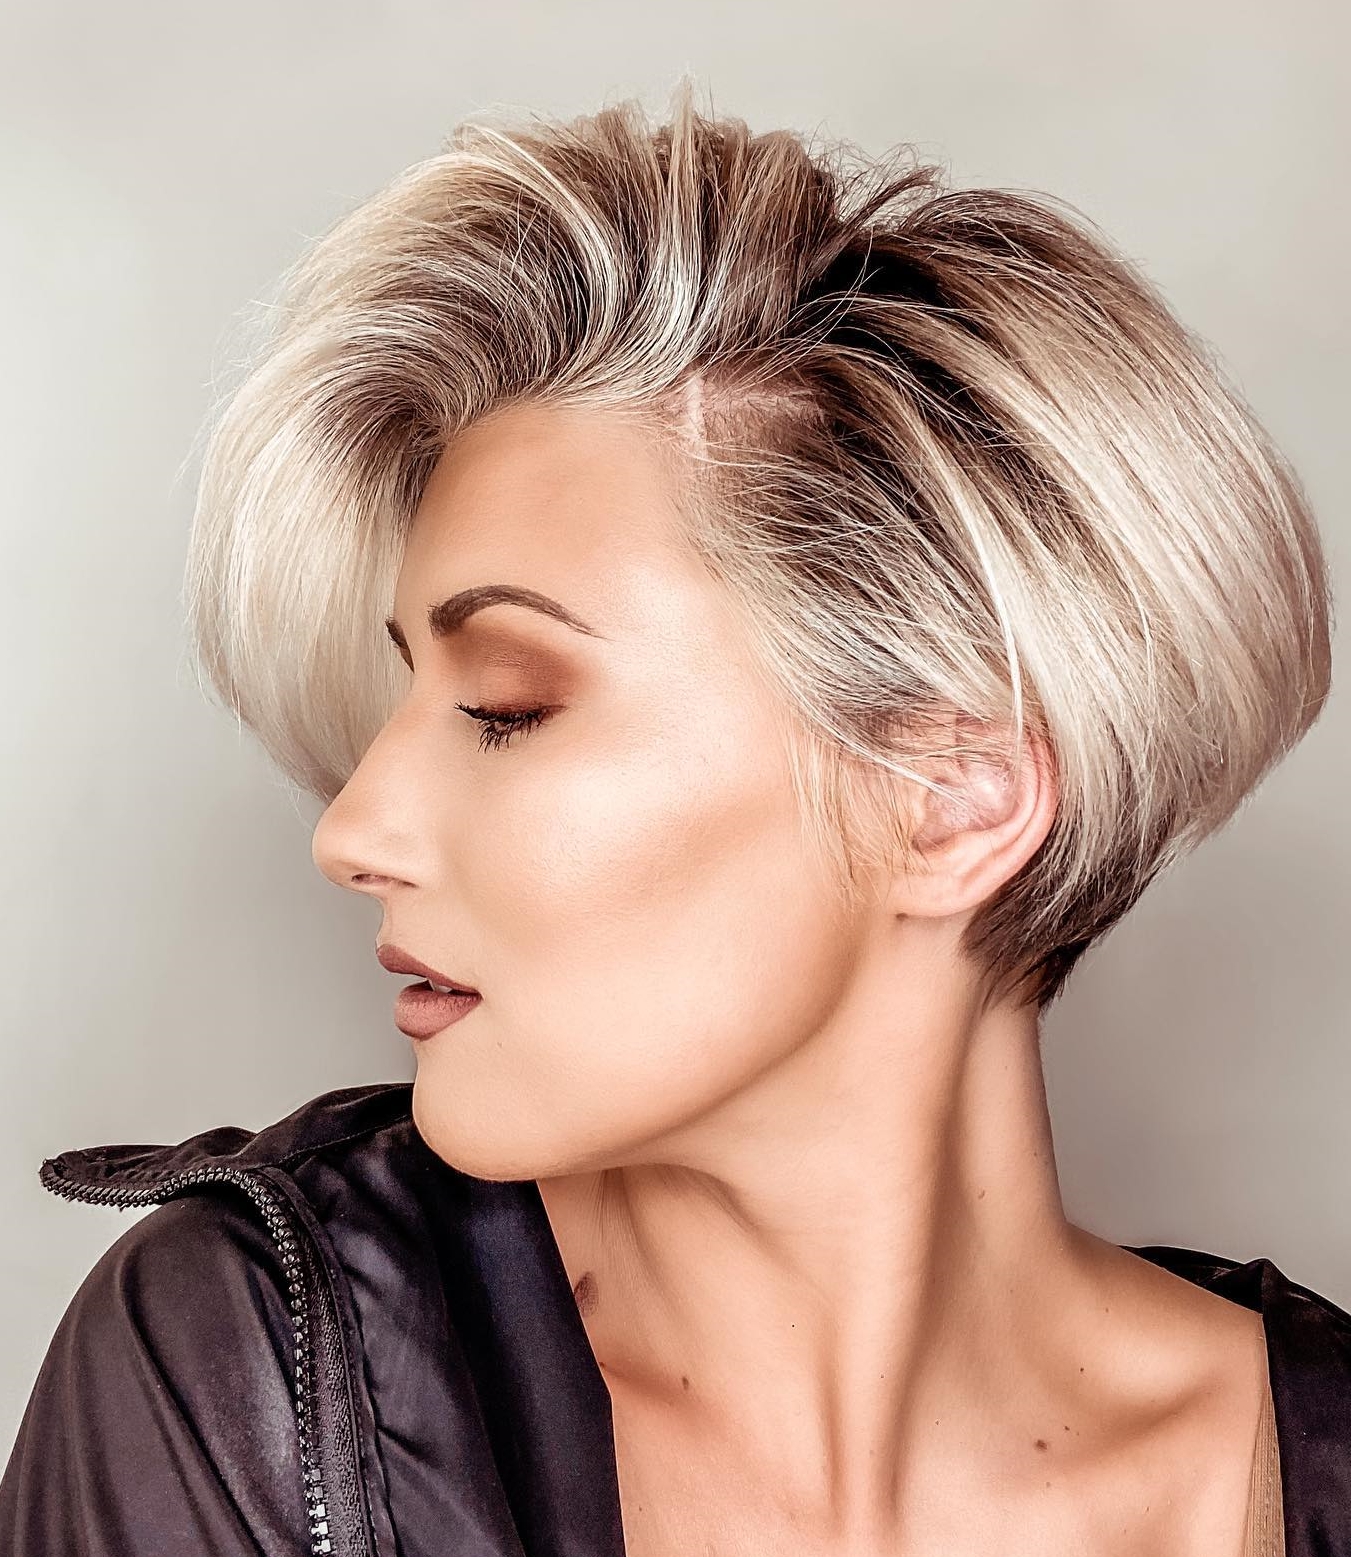 20 Short Blonde Hair Color Ideas to Try in 2023 - Hairstylery